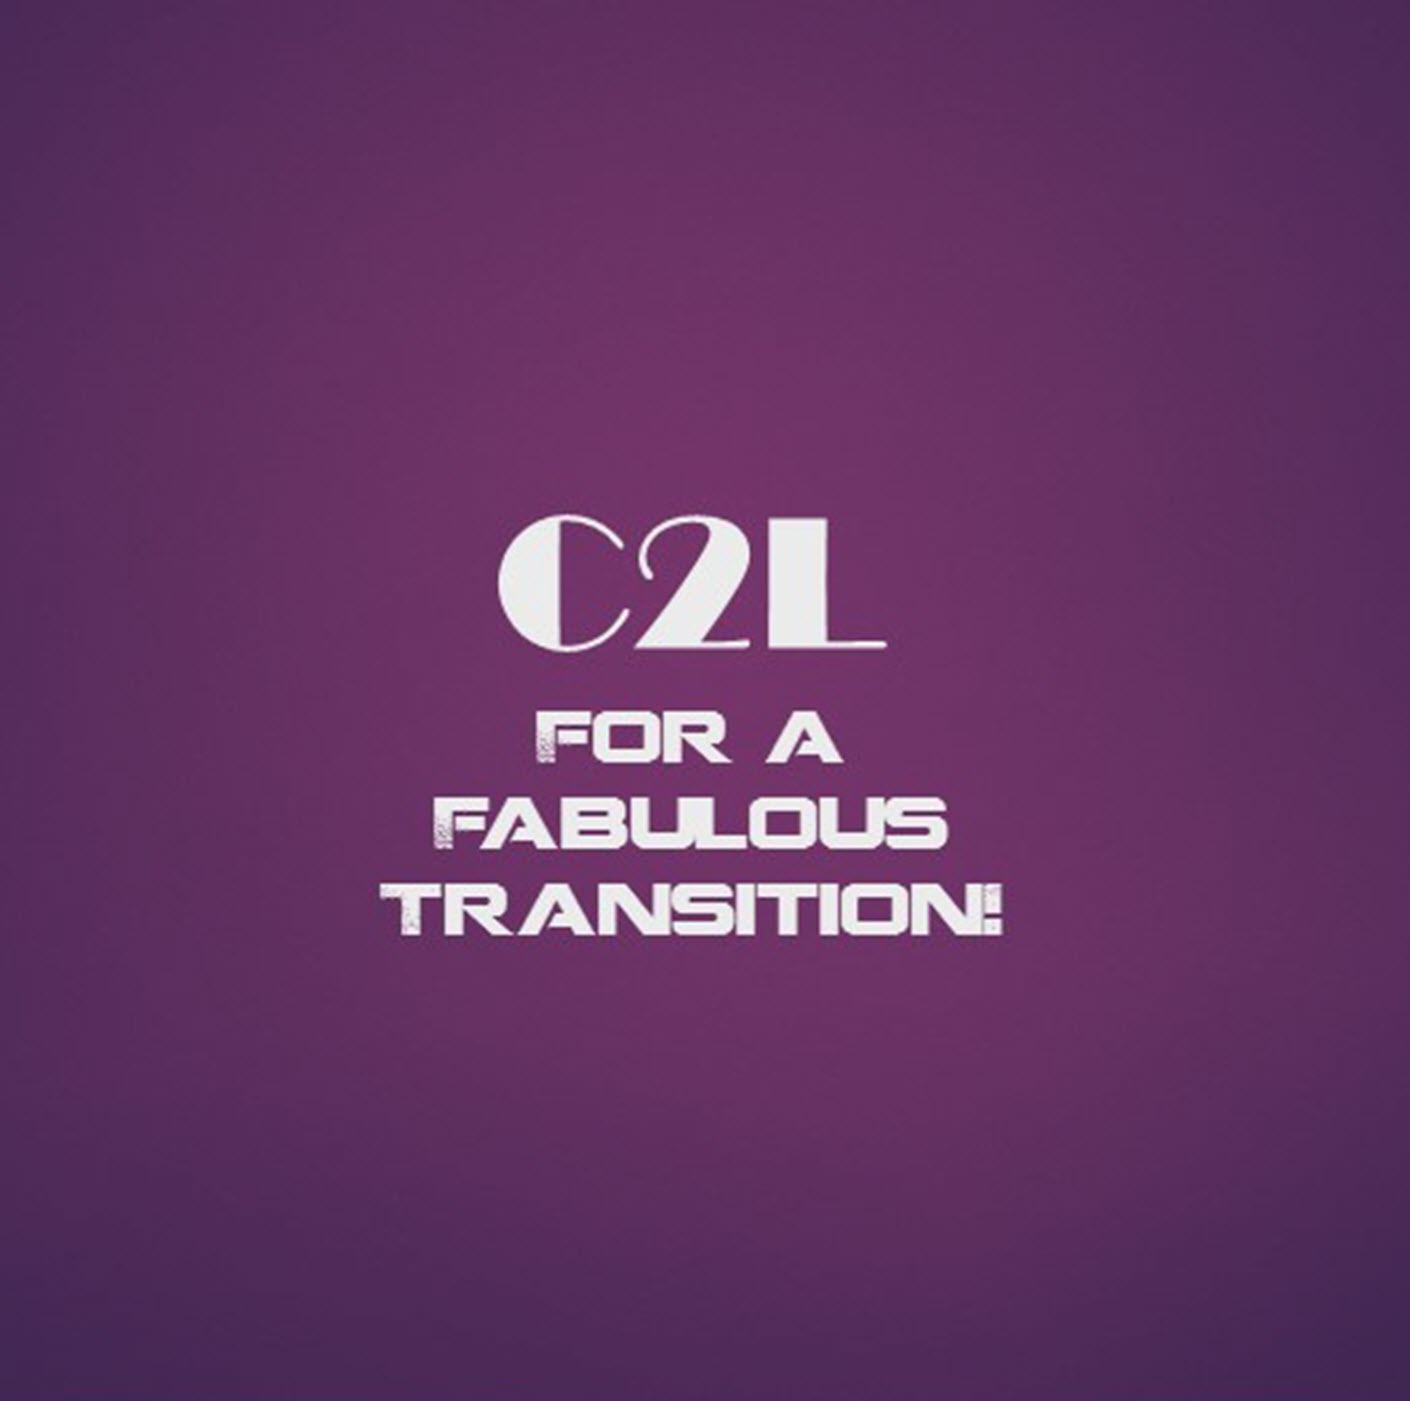 Fabulous Transitions: How C2L Can Help You!